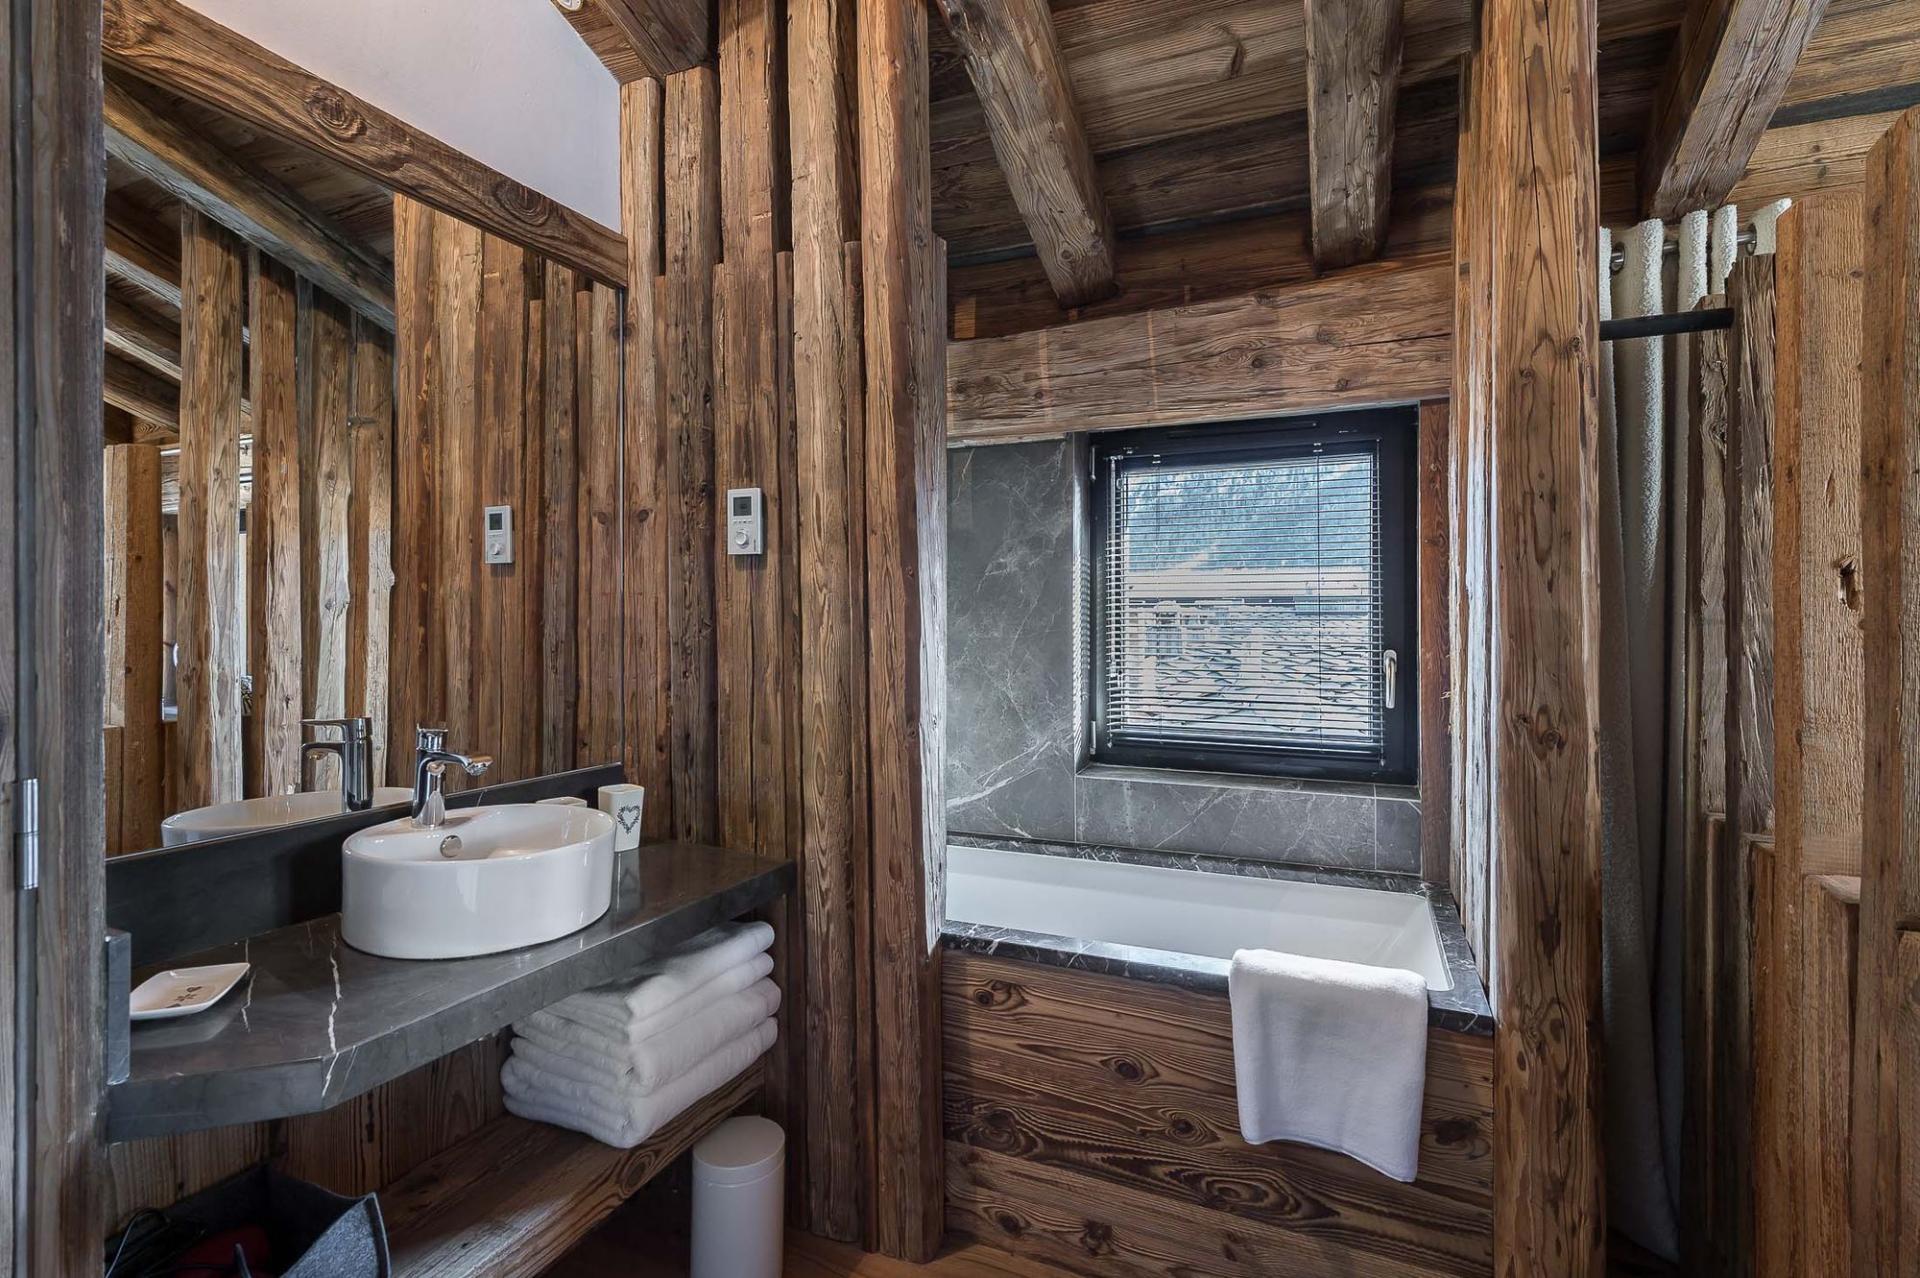 A BATHROOM IN THE PENTHOUSE APARTMENT